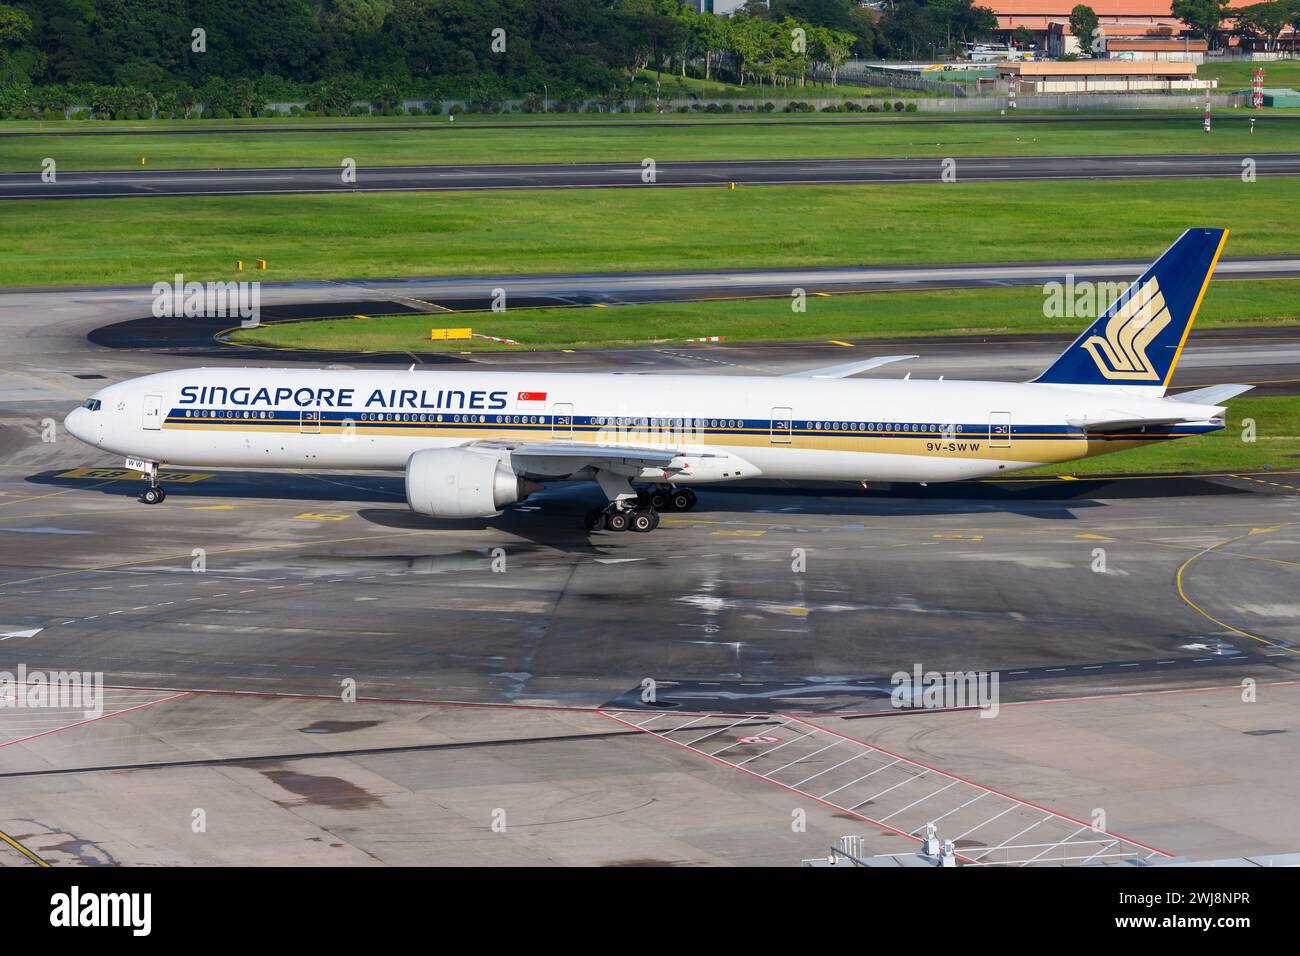 Singapore Airlines Boeing 777 at Changi Airport. Plane B777 taxiing. Airplane 777-300ER of Singapore Airlines registered as 9V-SWW. Stock Photo